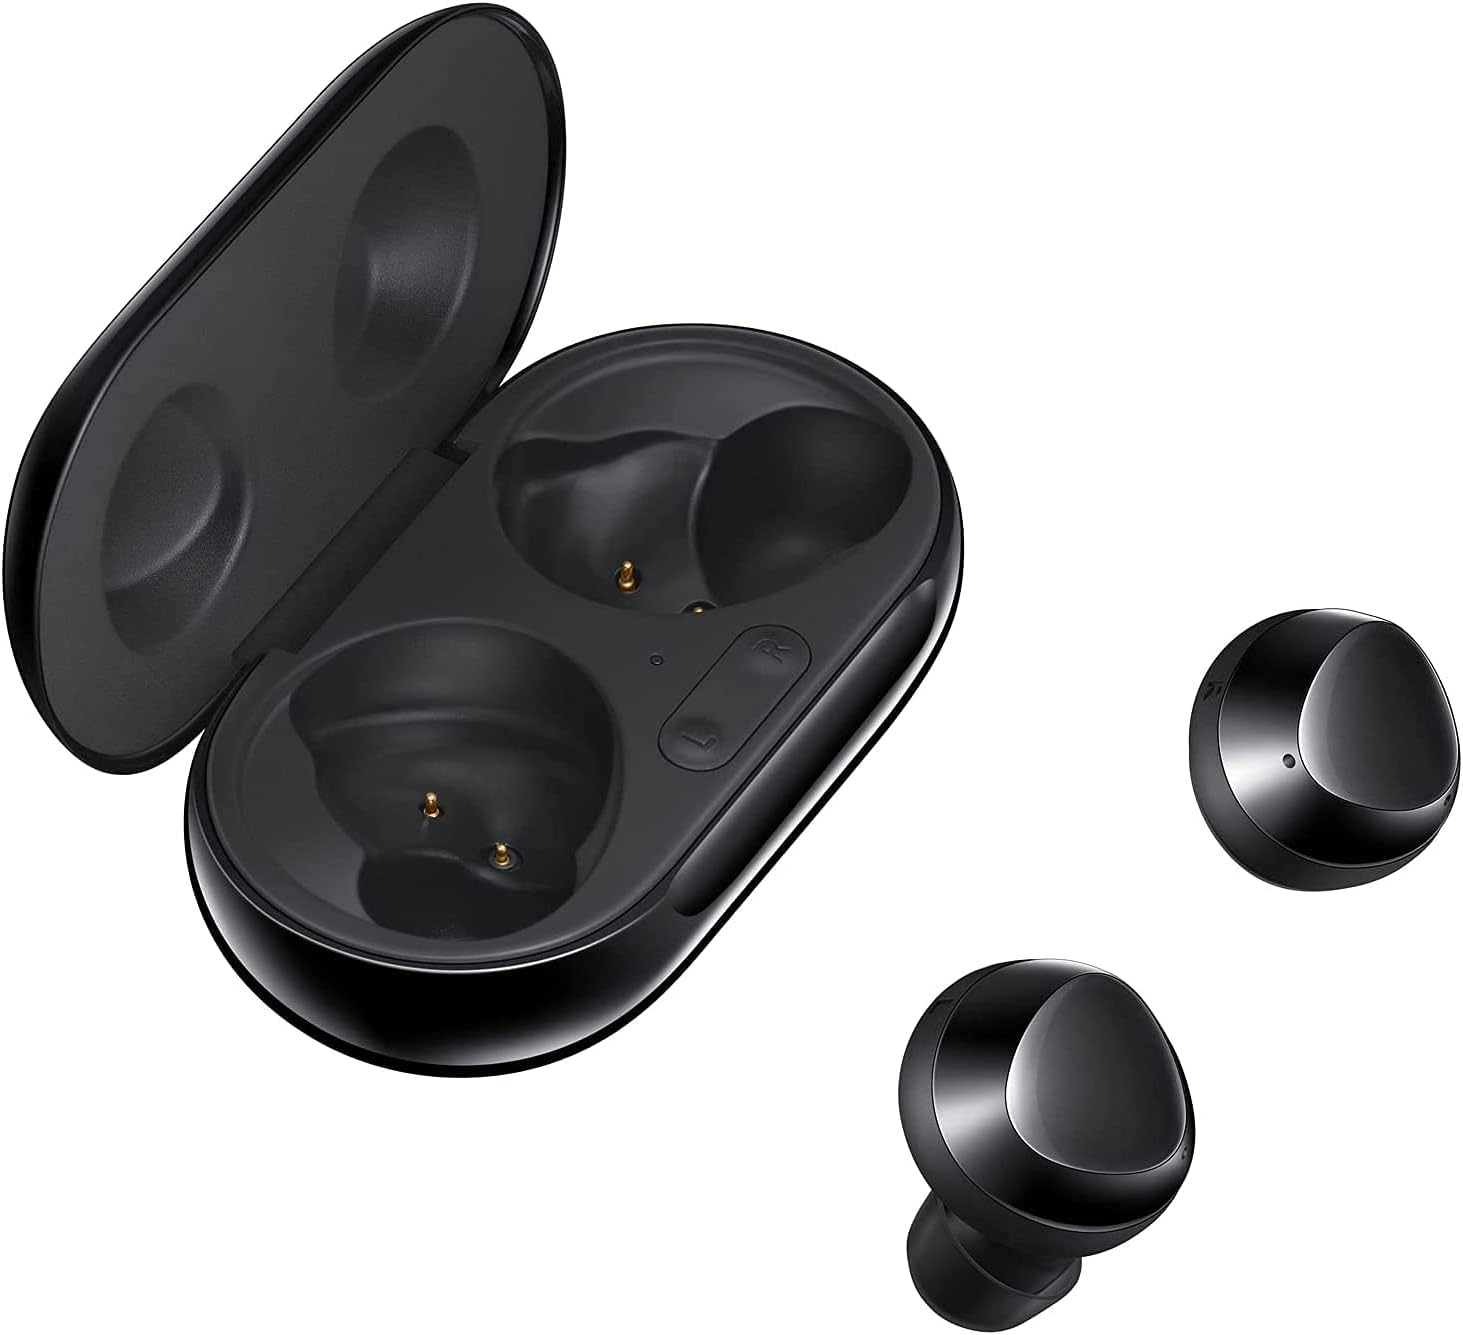 Samsung Earbuds Connection: Connecting Bluetooth Samsung Earbuds